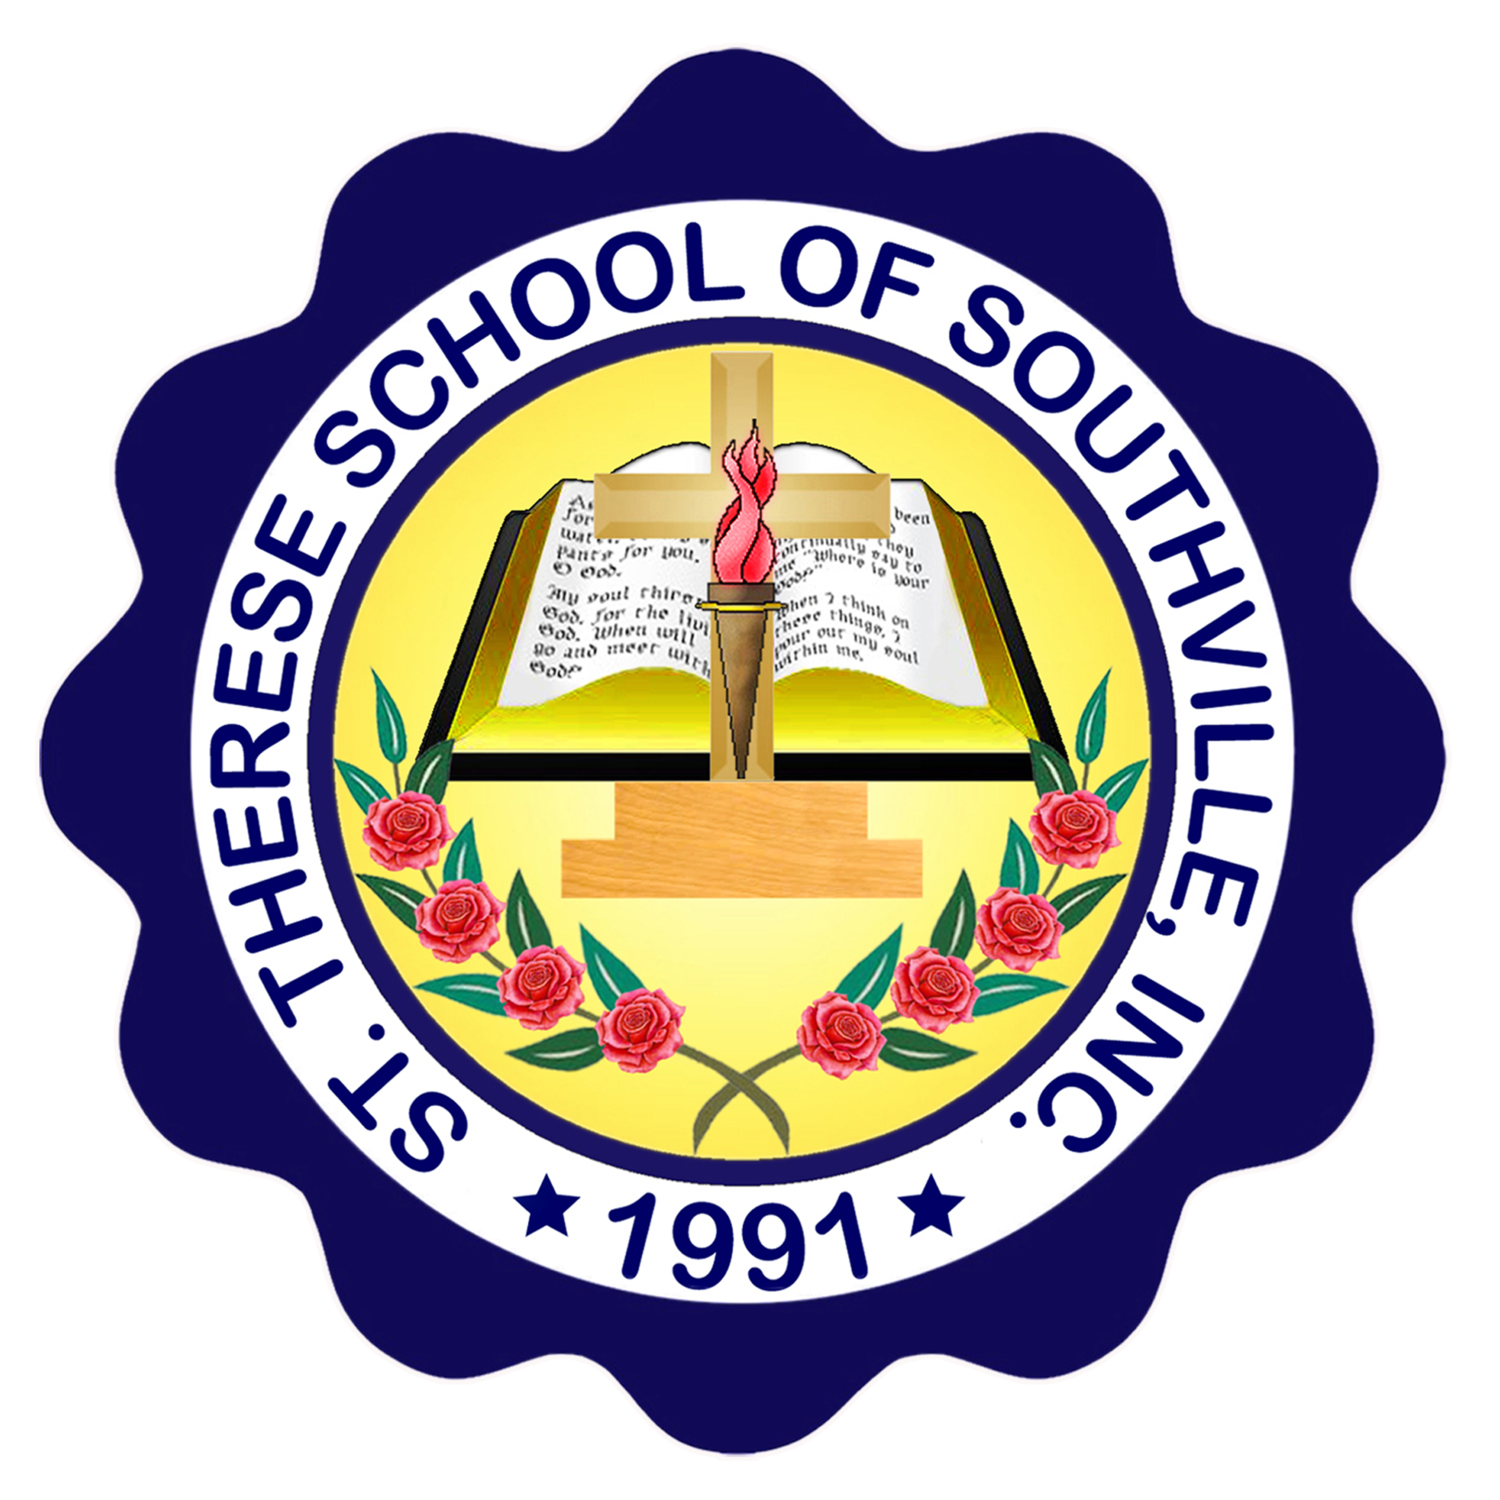 St. Therese School of Southville